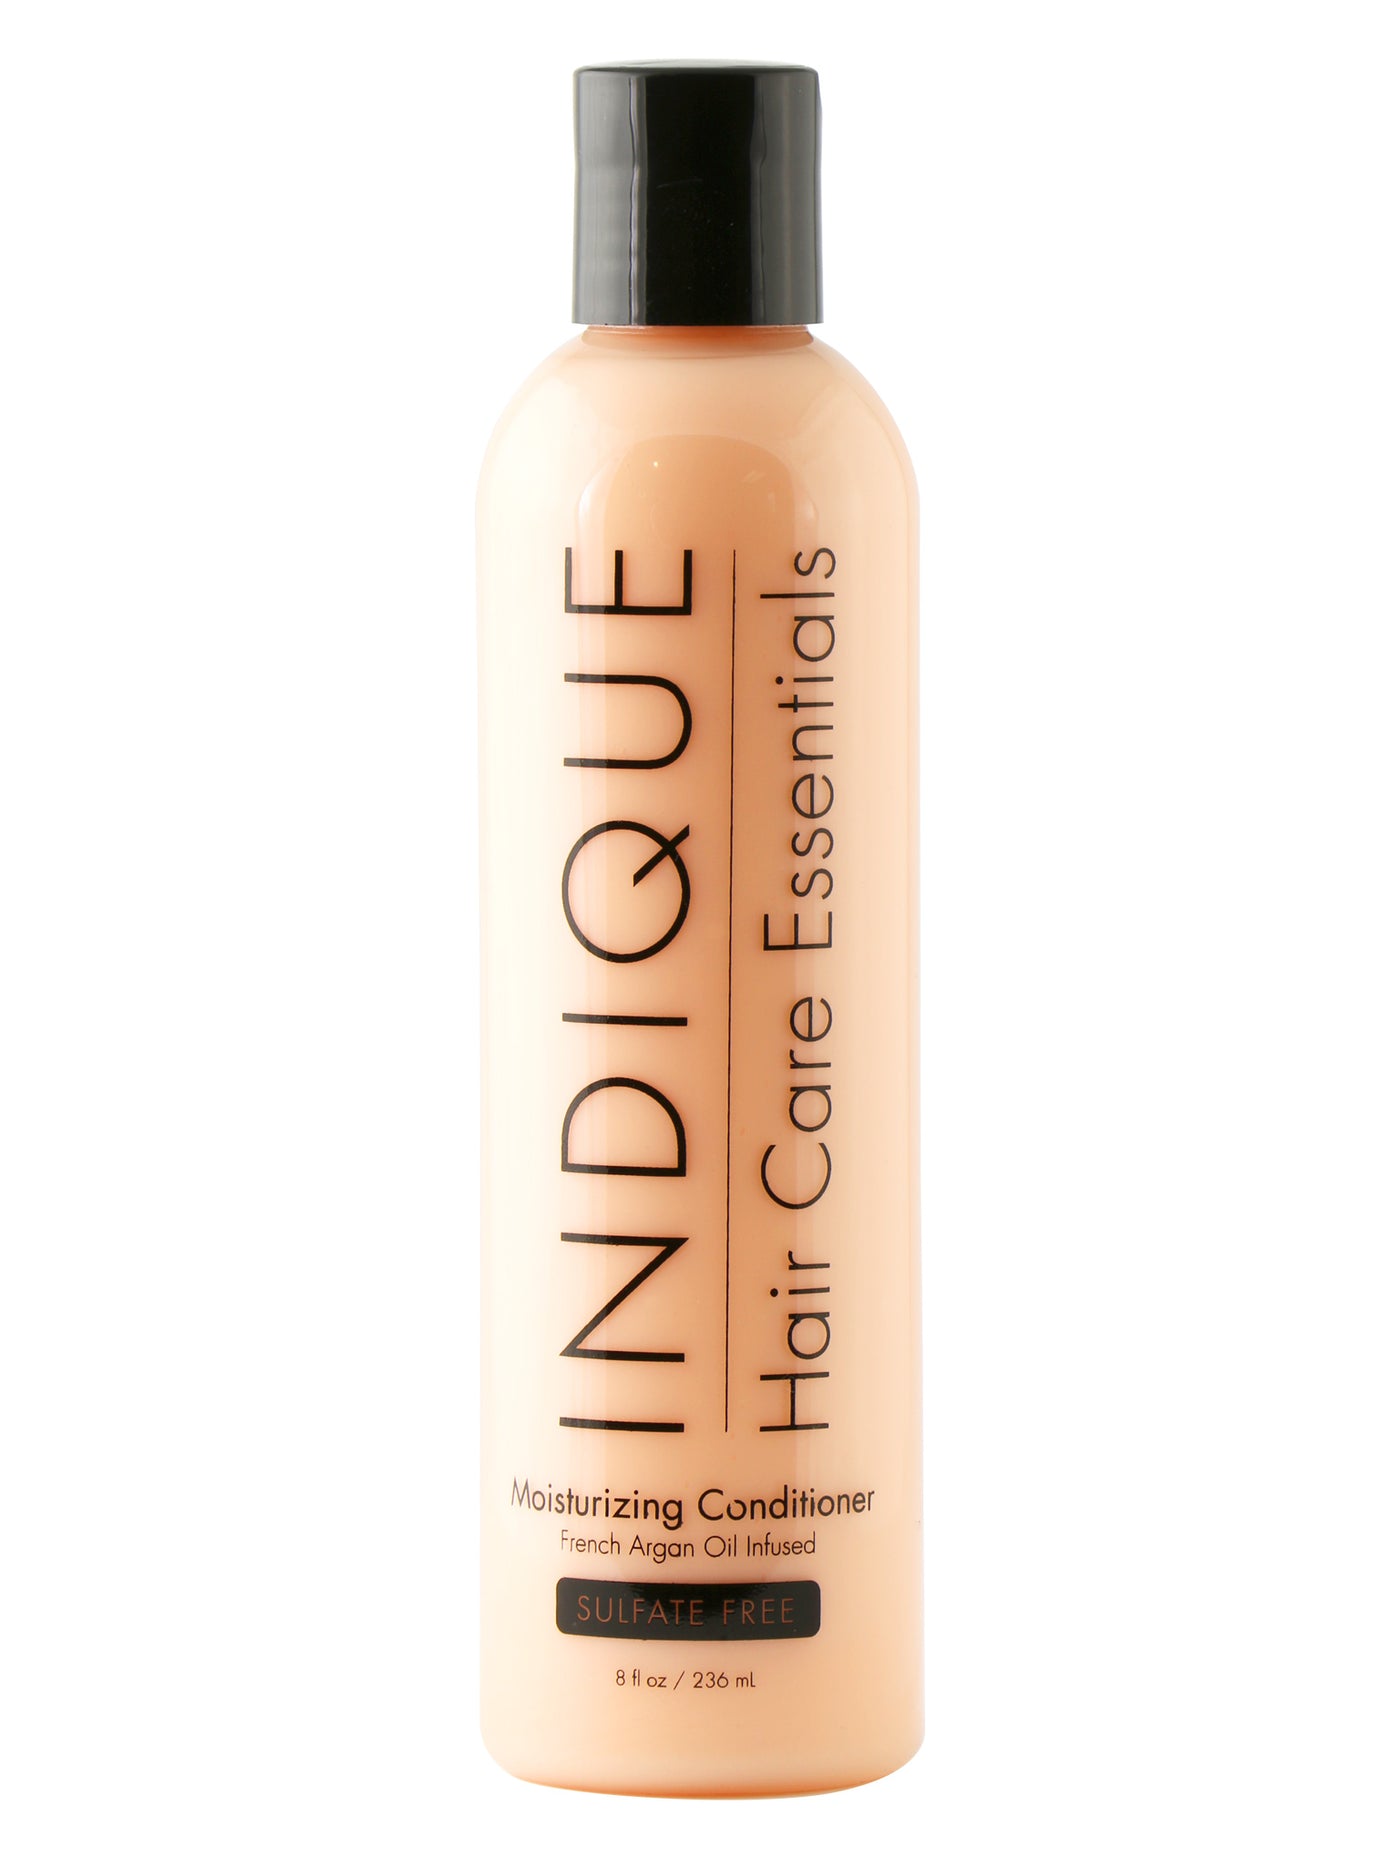 Indique Hair Care Essentials Moisturizing Conditioner For Hair Extensions And Natural Hair